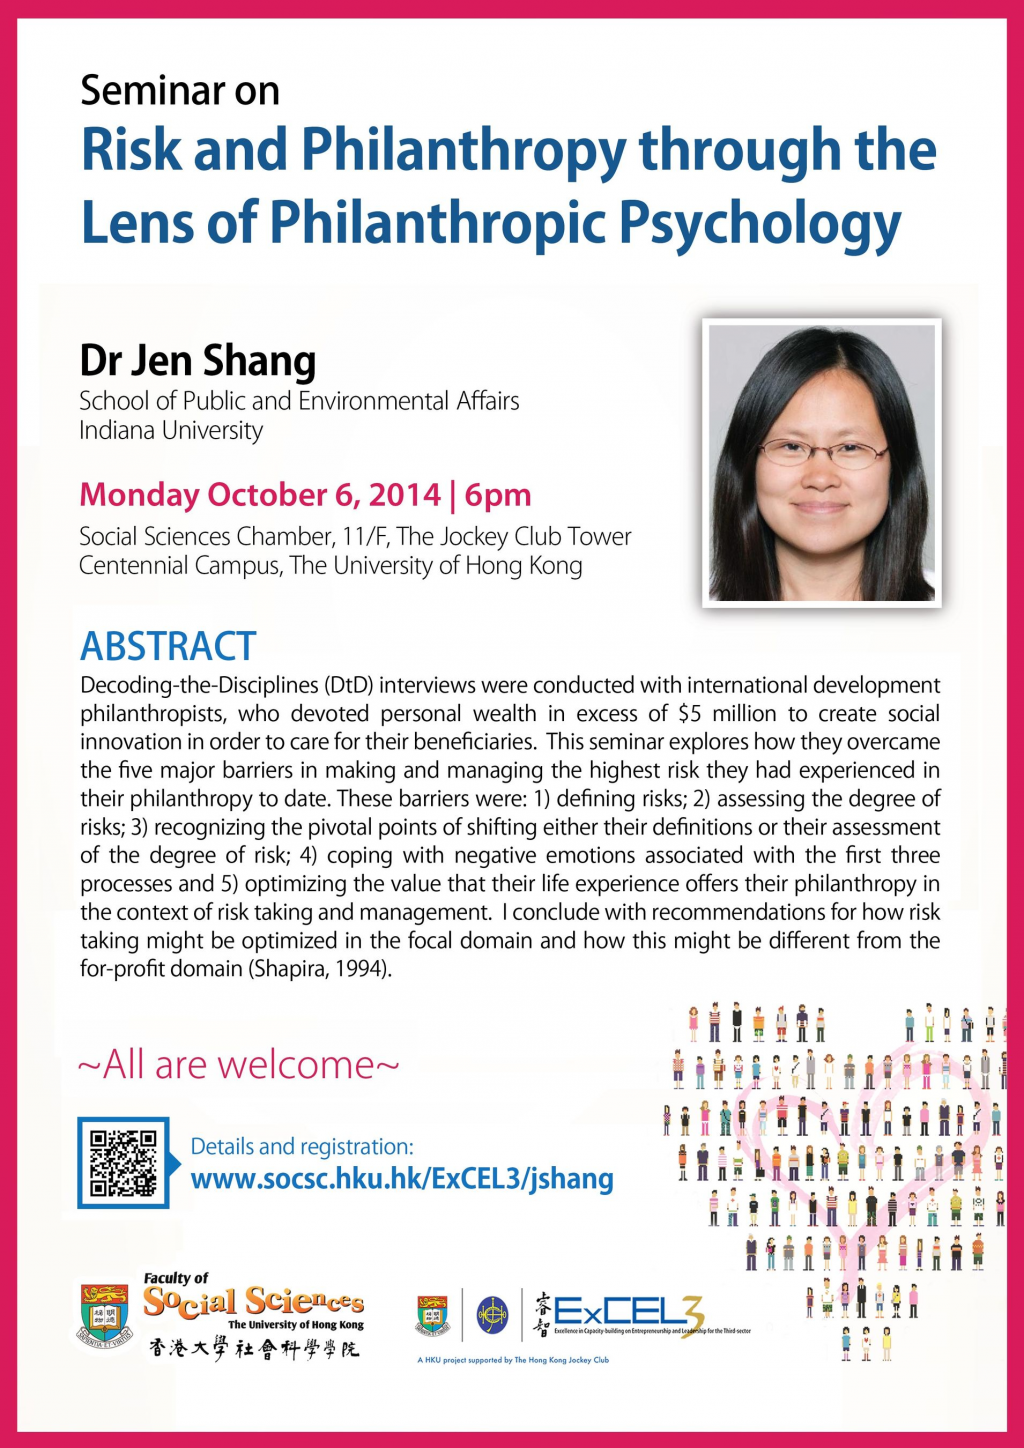 Seminar on Risk and Philanthropy through the Lens of Philanthropic Psychology